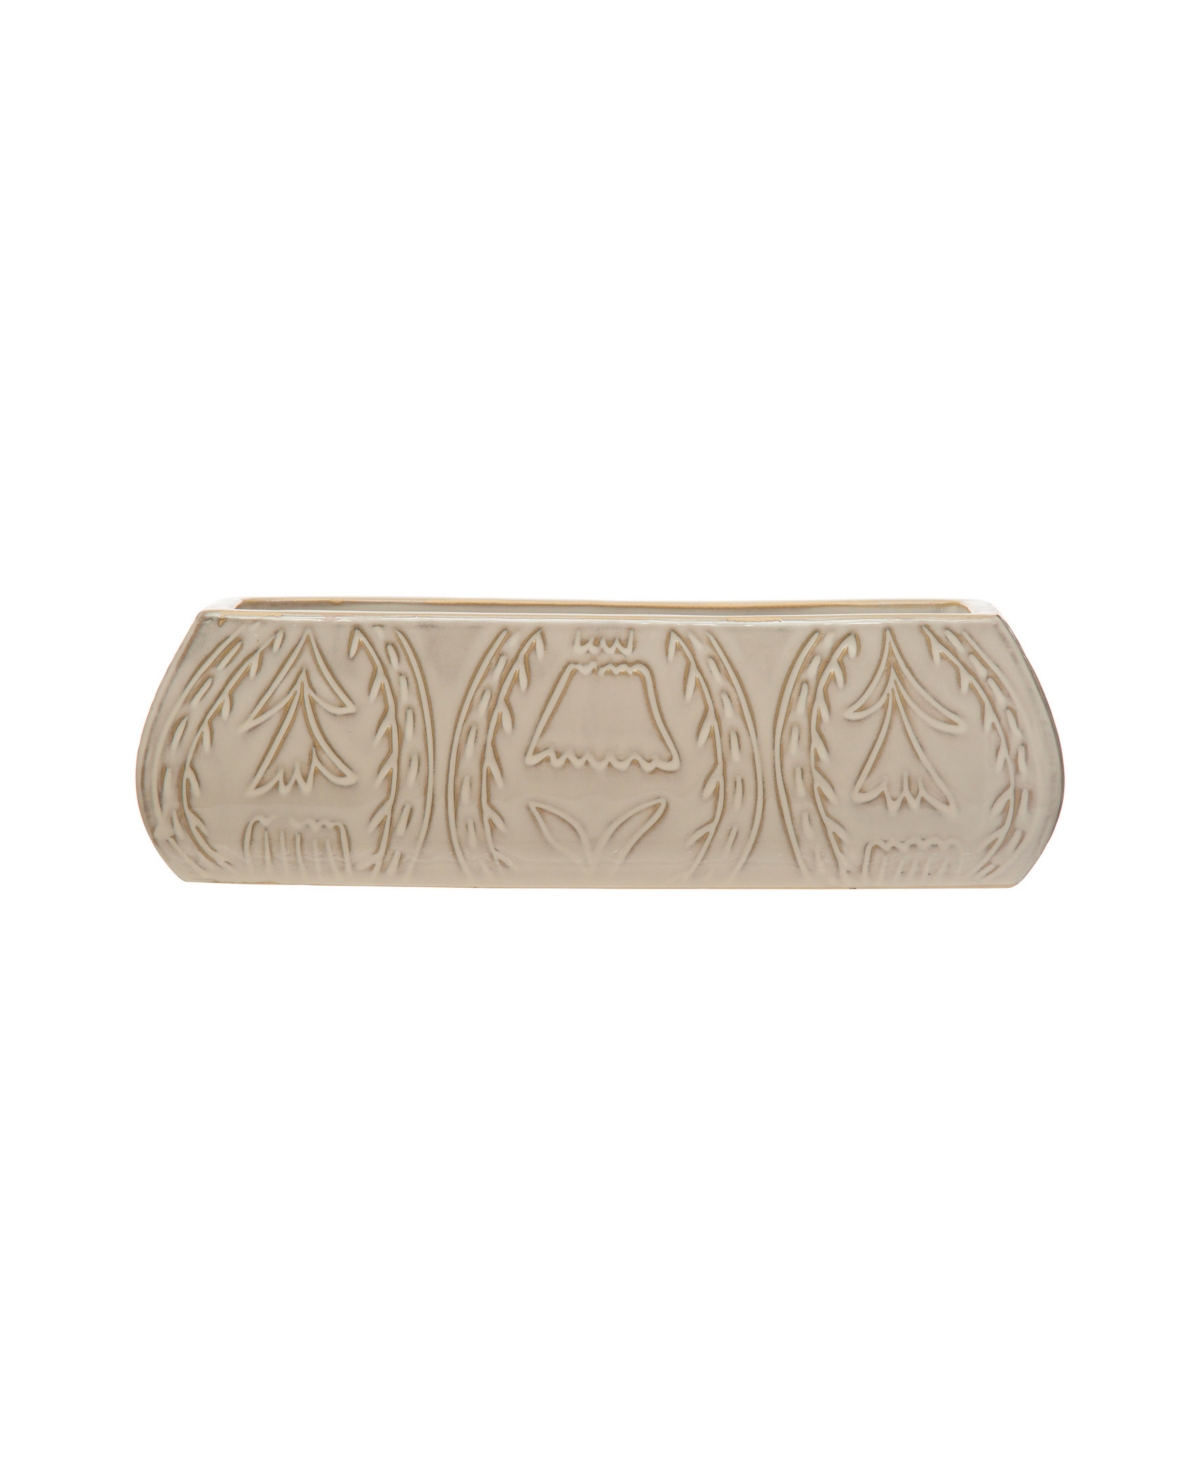 Stoneware Planter with Etched Flower Design - White